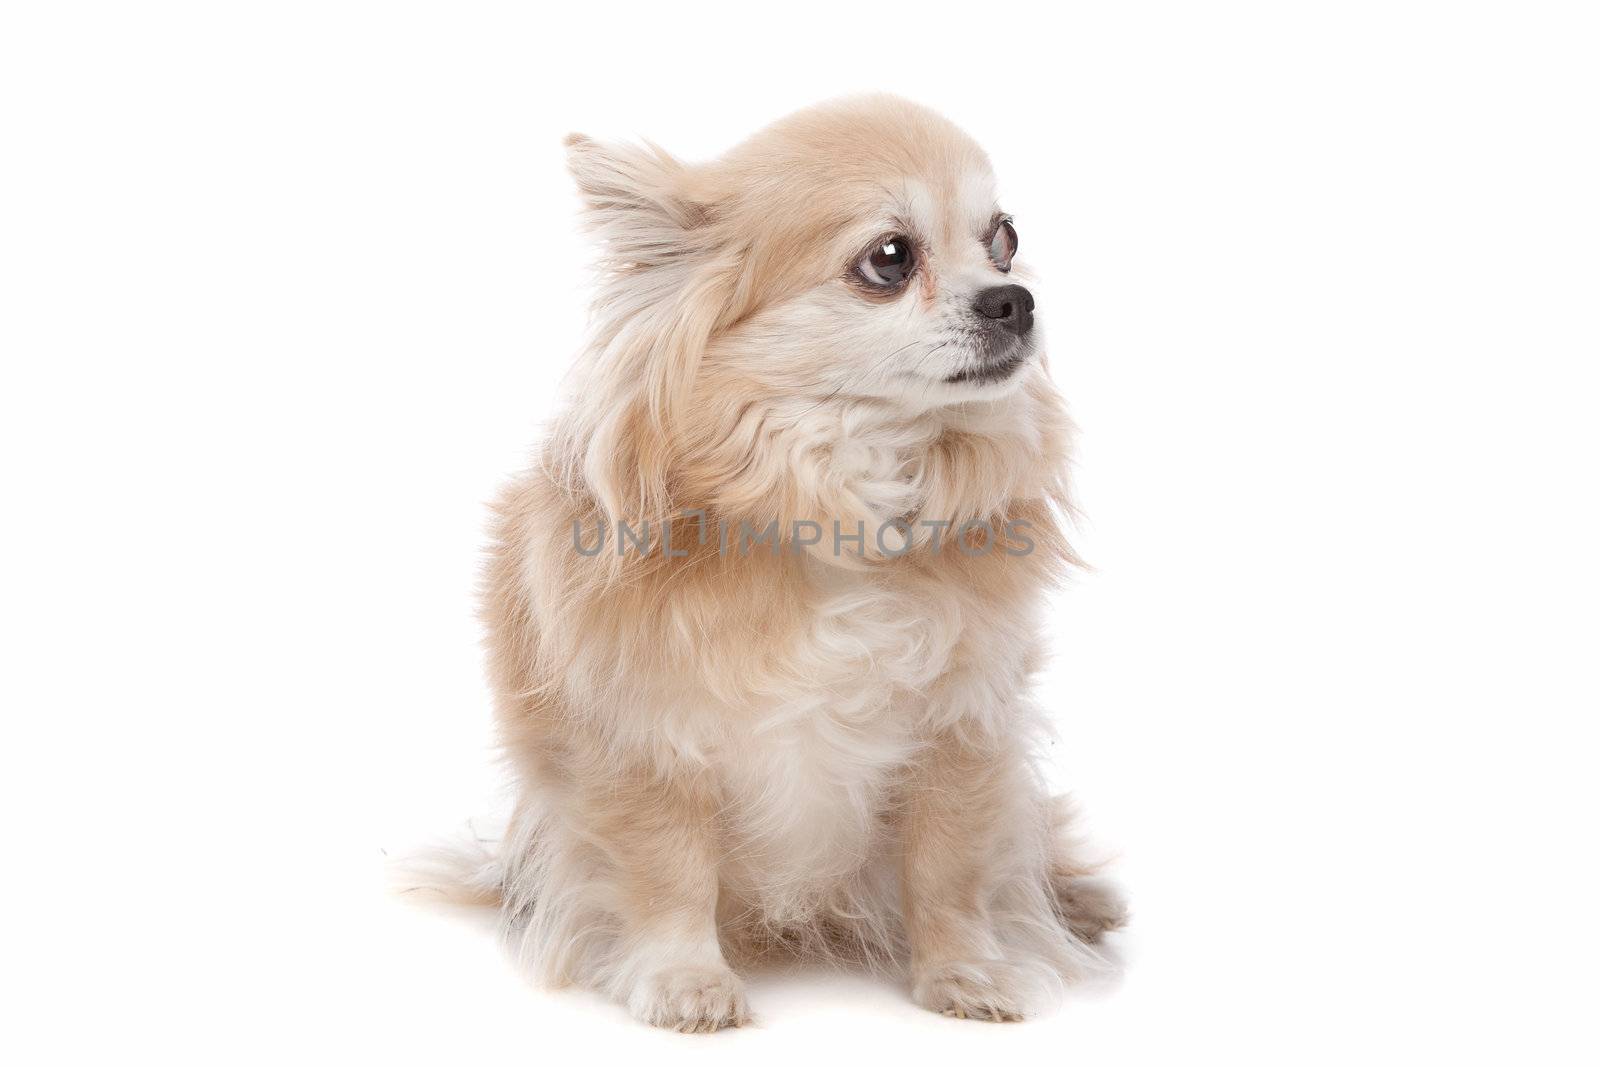 Long haired chihuahua dog in front of a white background